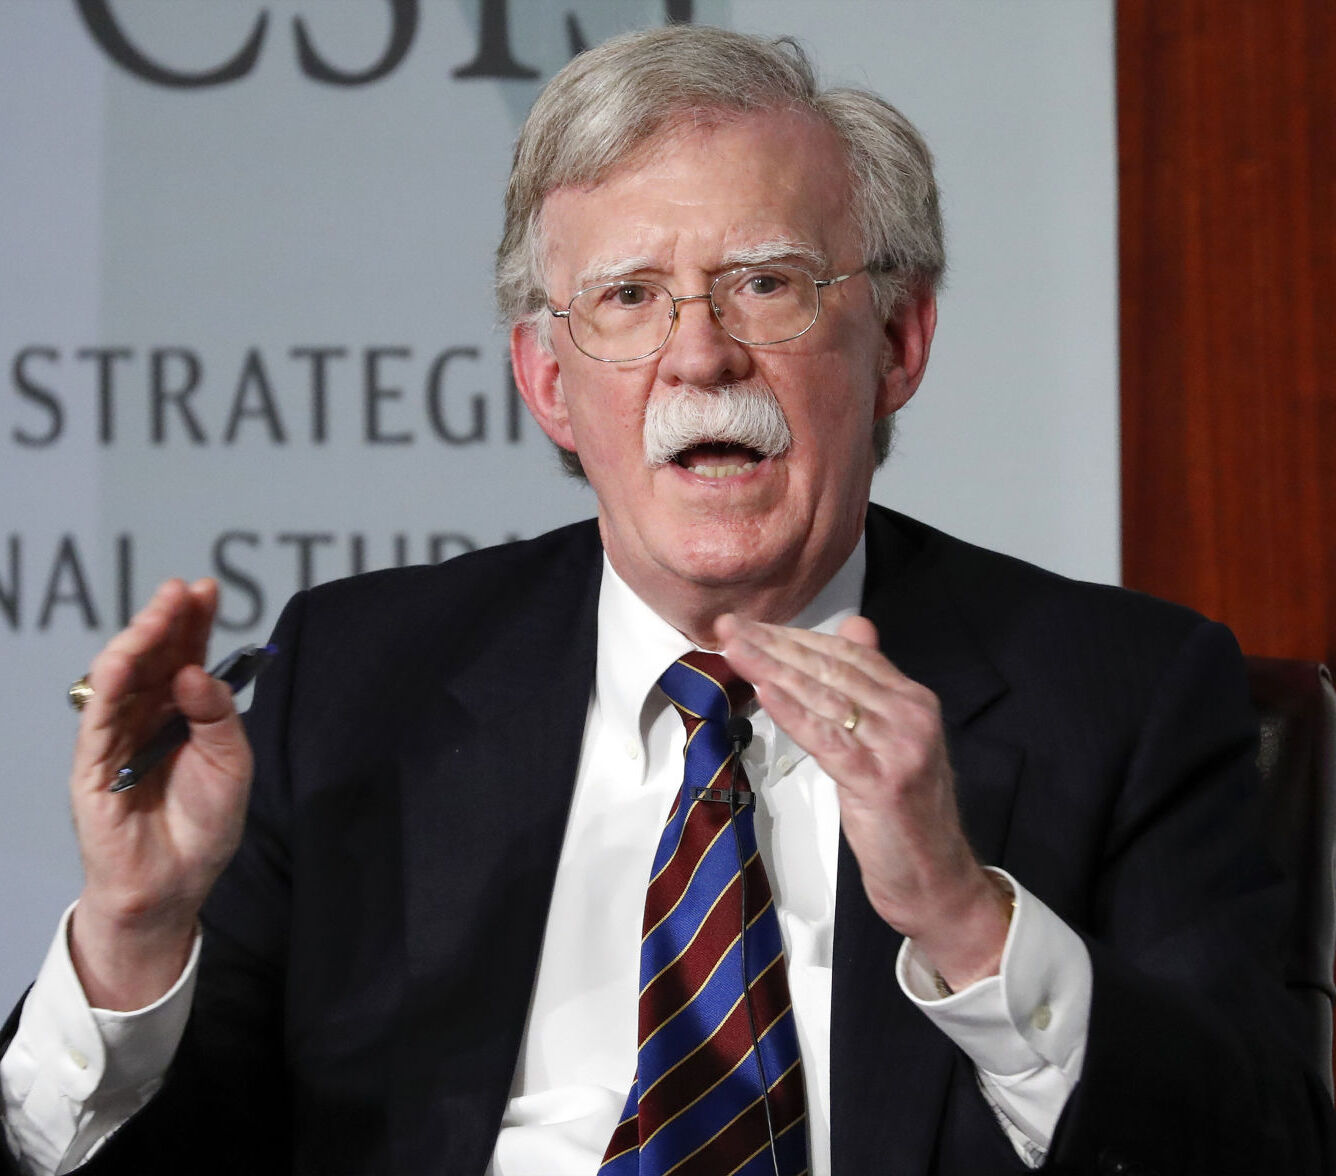 Are you going to read the John Bolton book?